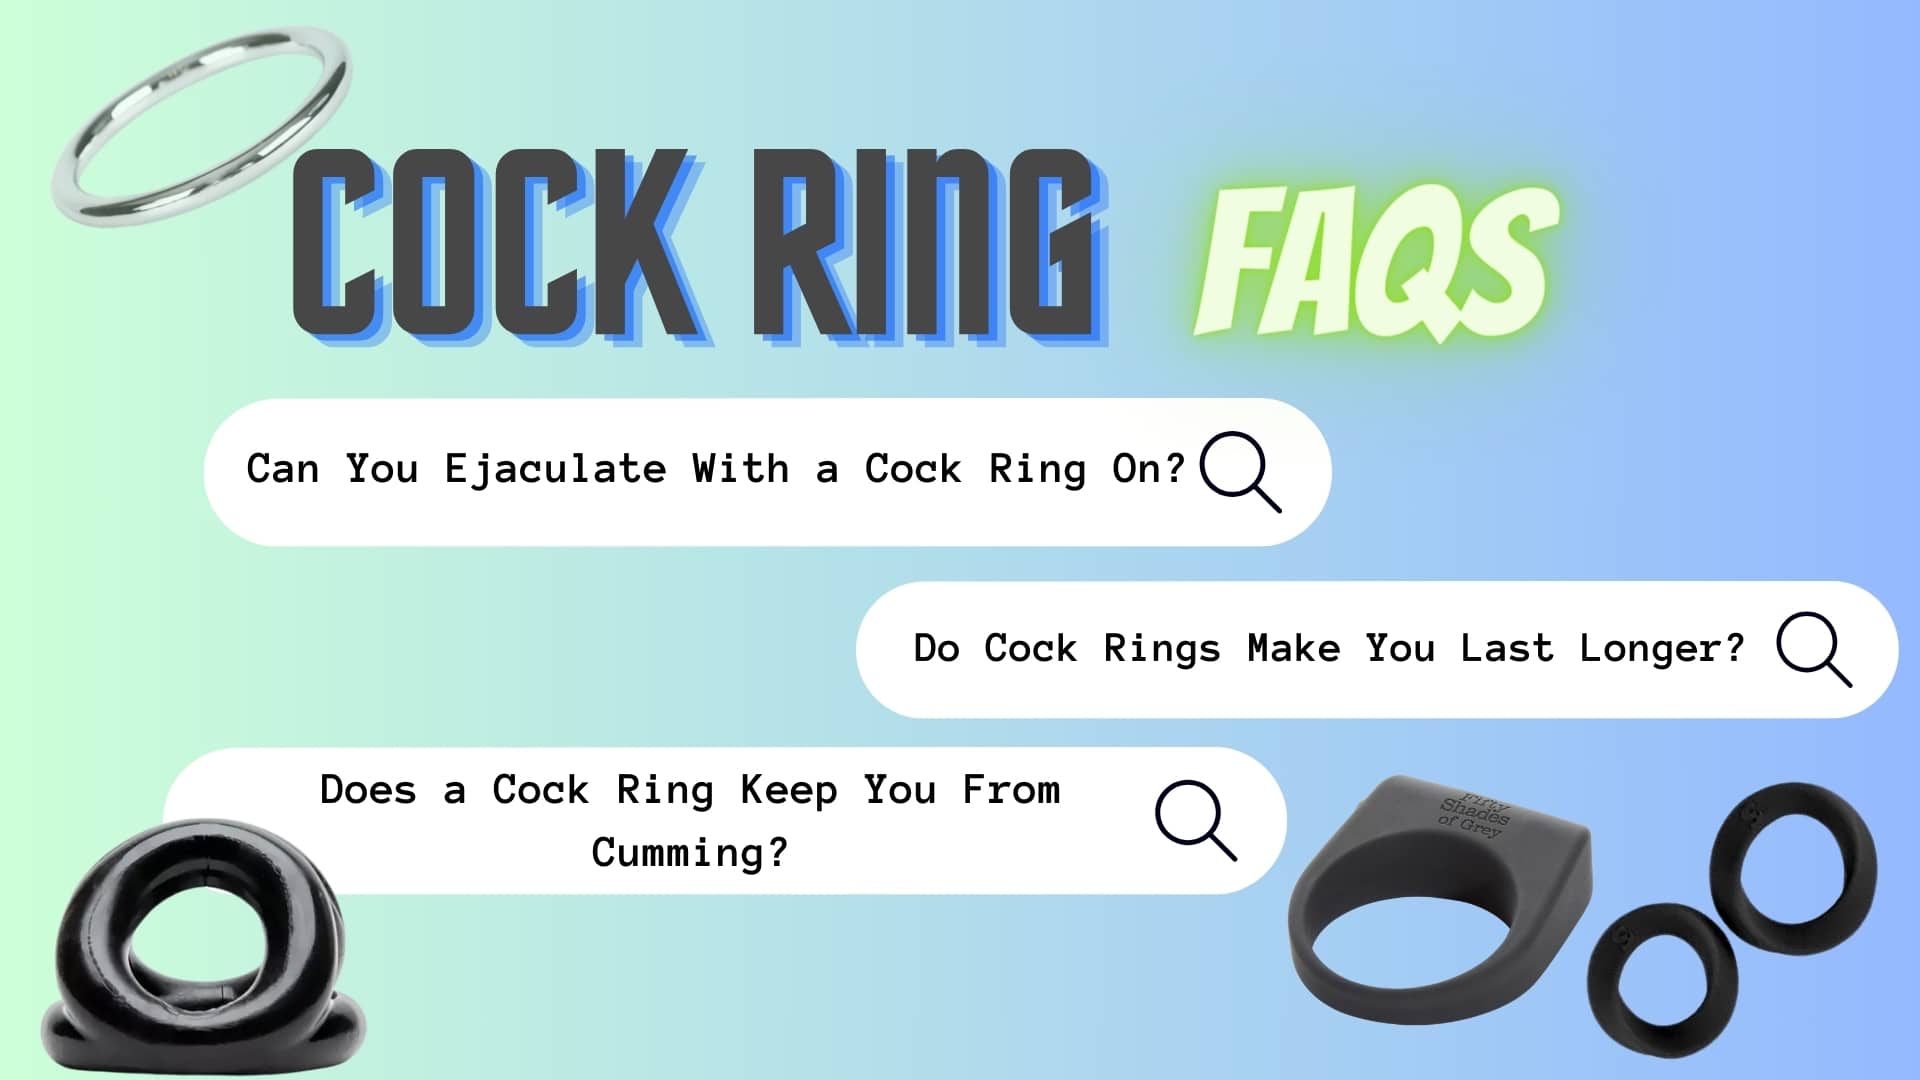 How a cock ring makes you last longer, but doesn’t keep you from cumming (ejaculating)